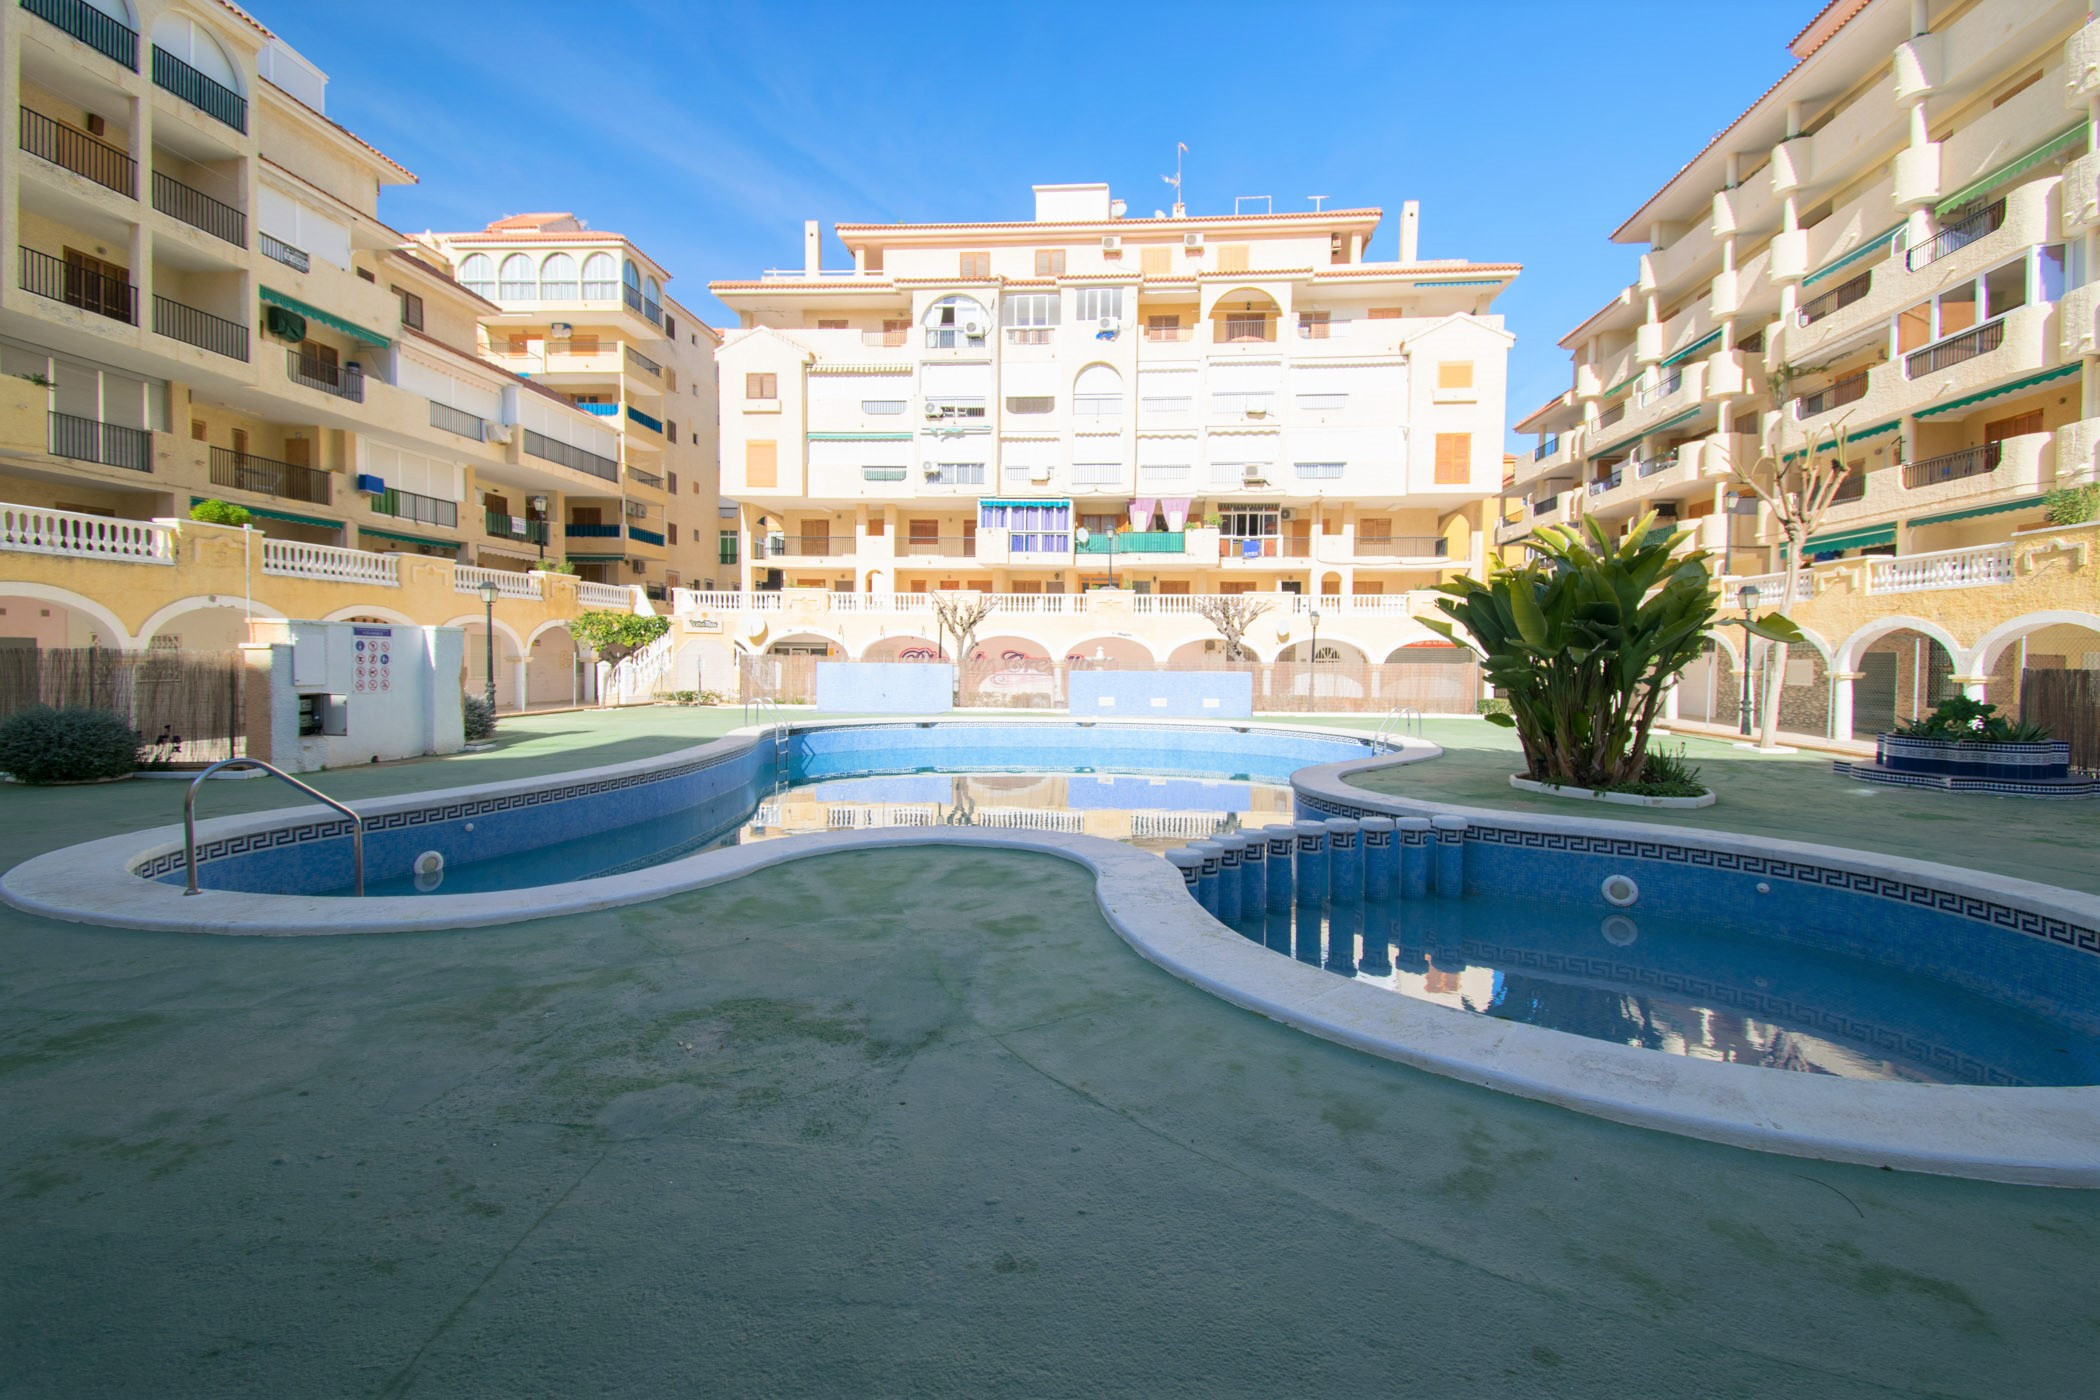 New Alicante Accommodation Apartments for rent